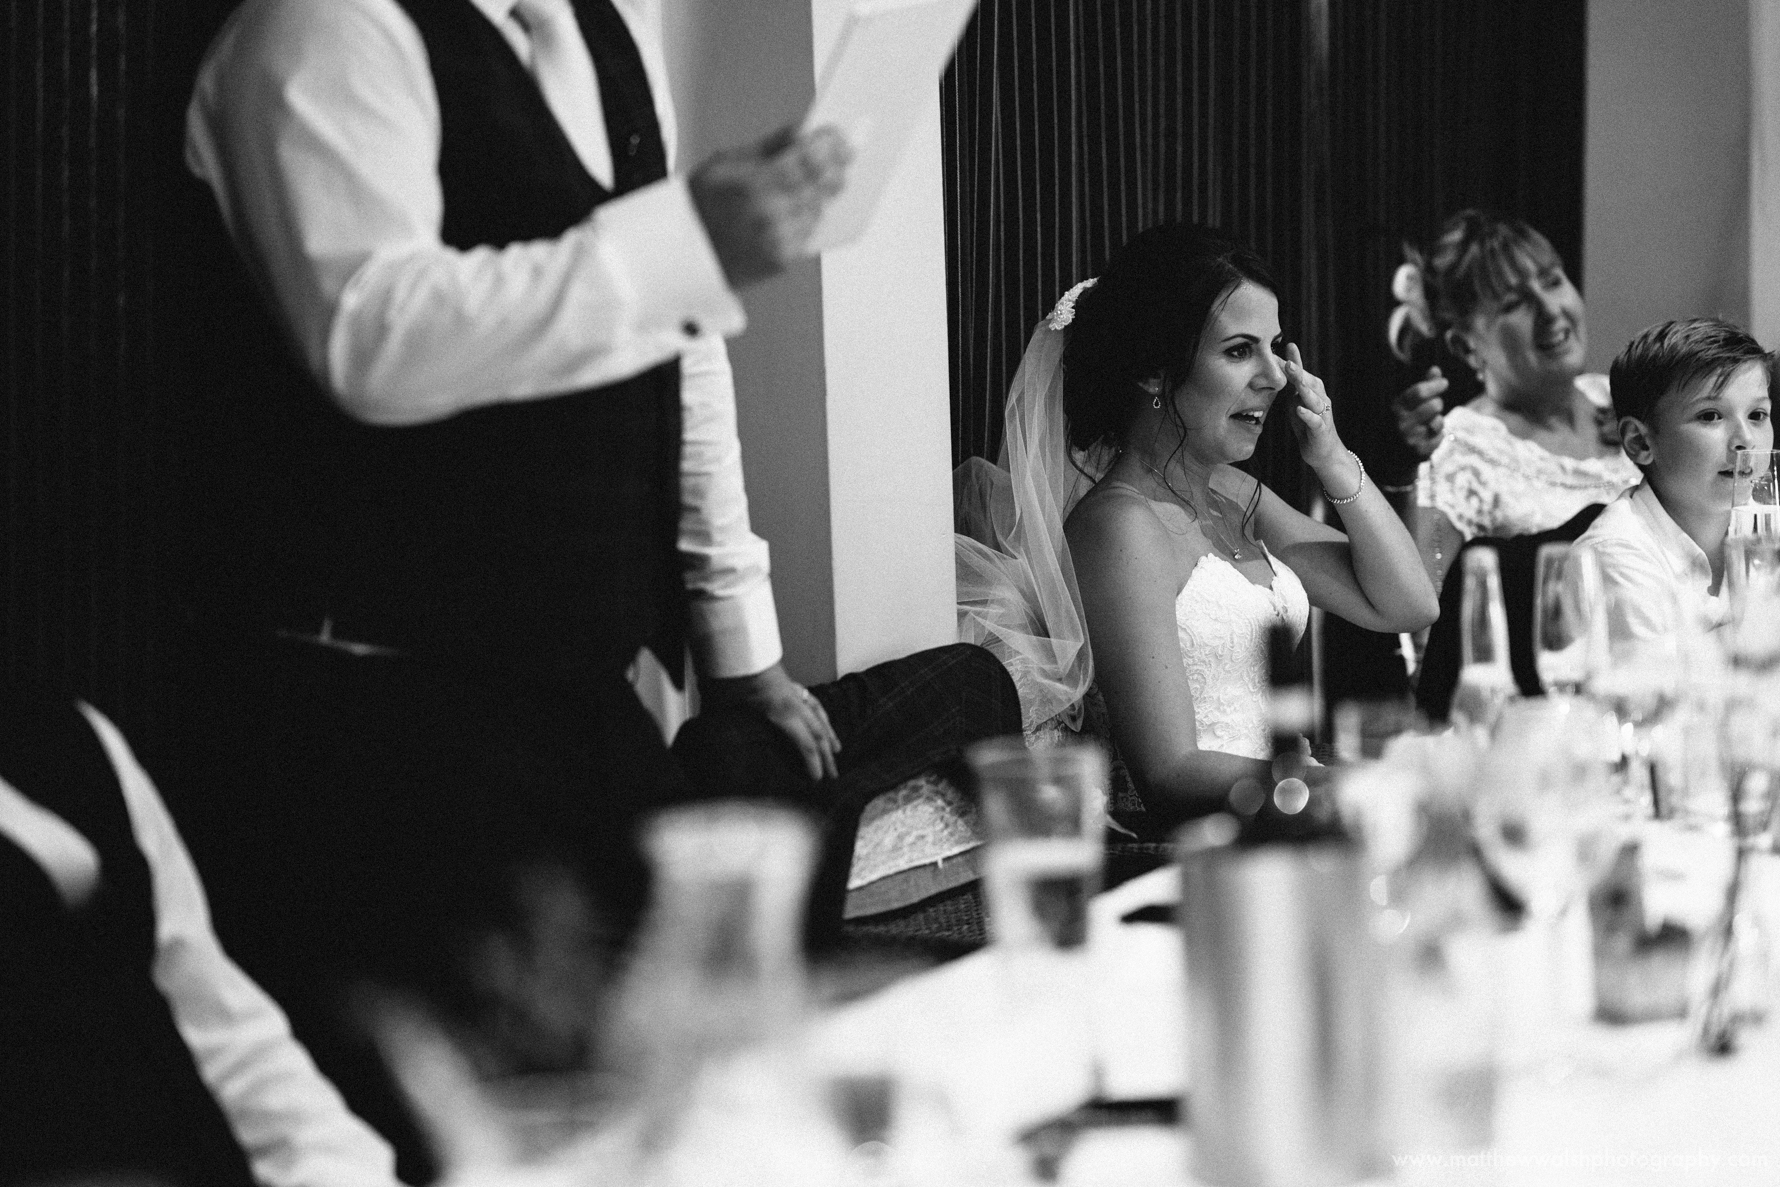 A hilarious moment makes the bride shed a tear